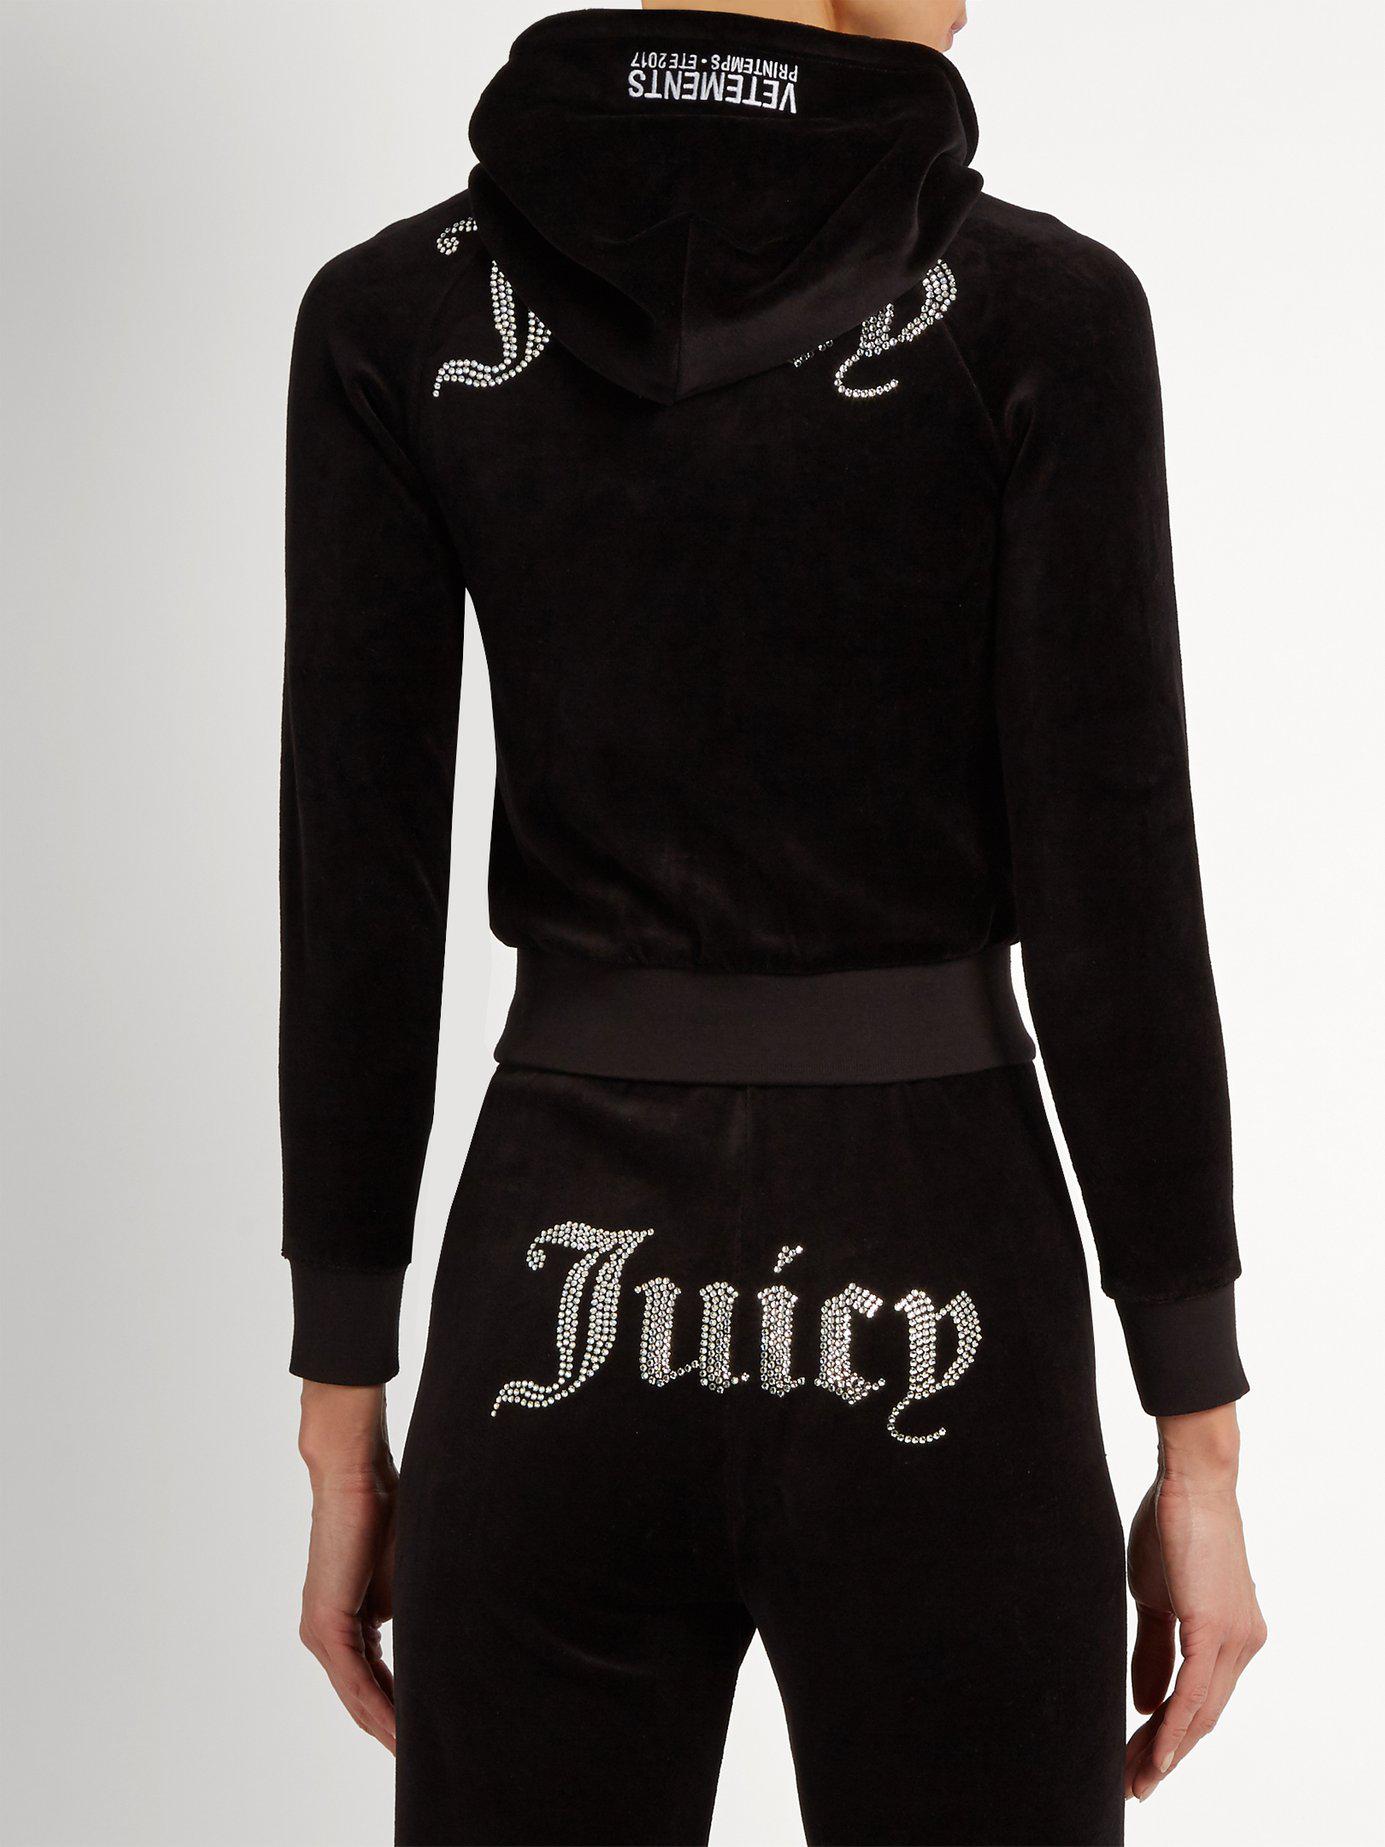 Vetements X Juicy Couture Cotton Blend Velour Hooded Top in Black - Lyst